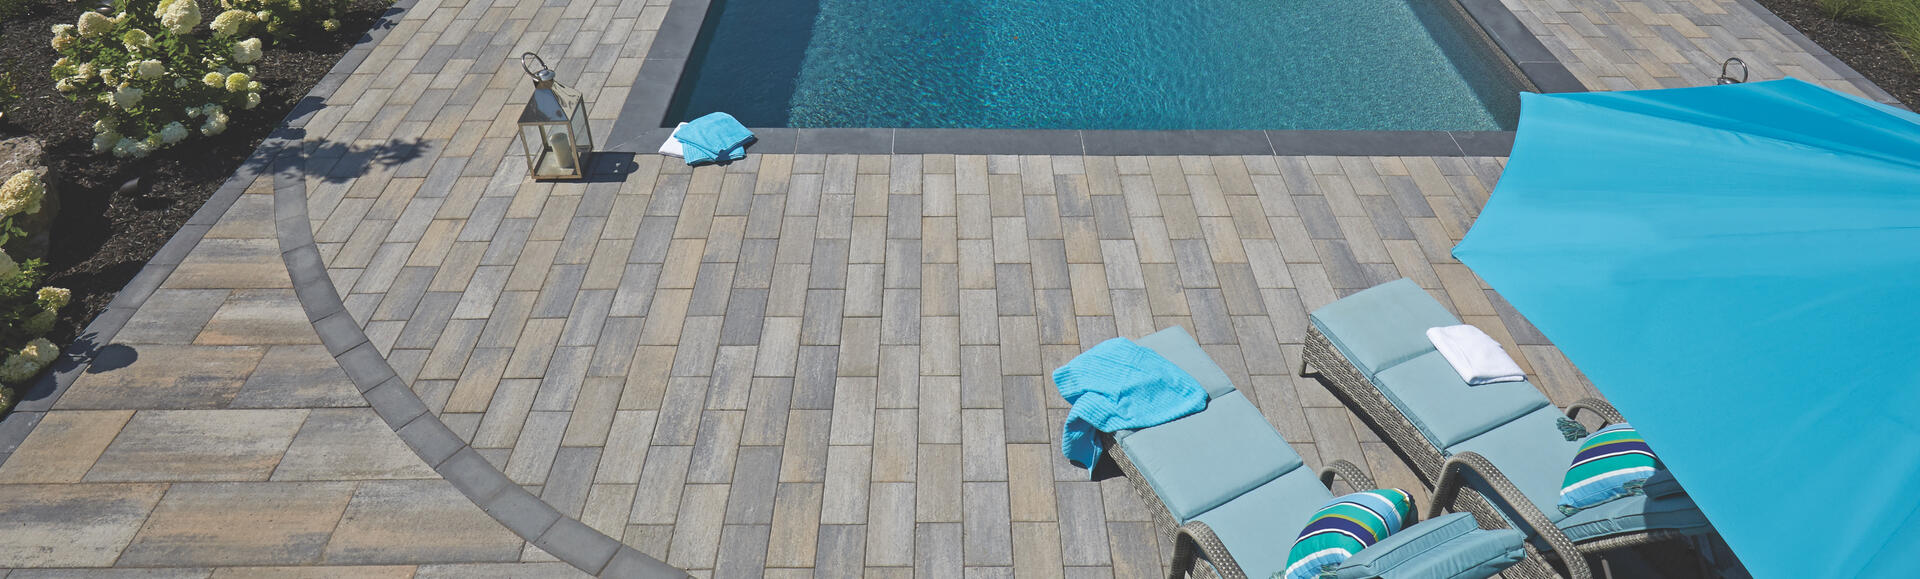 Monterey Tweed by Oaks Landscape Products